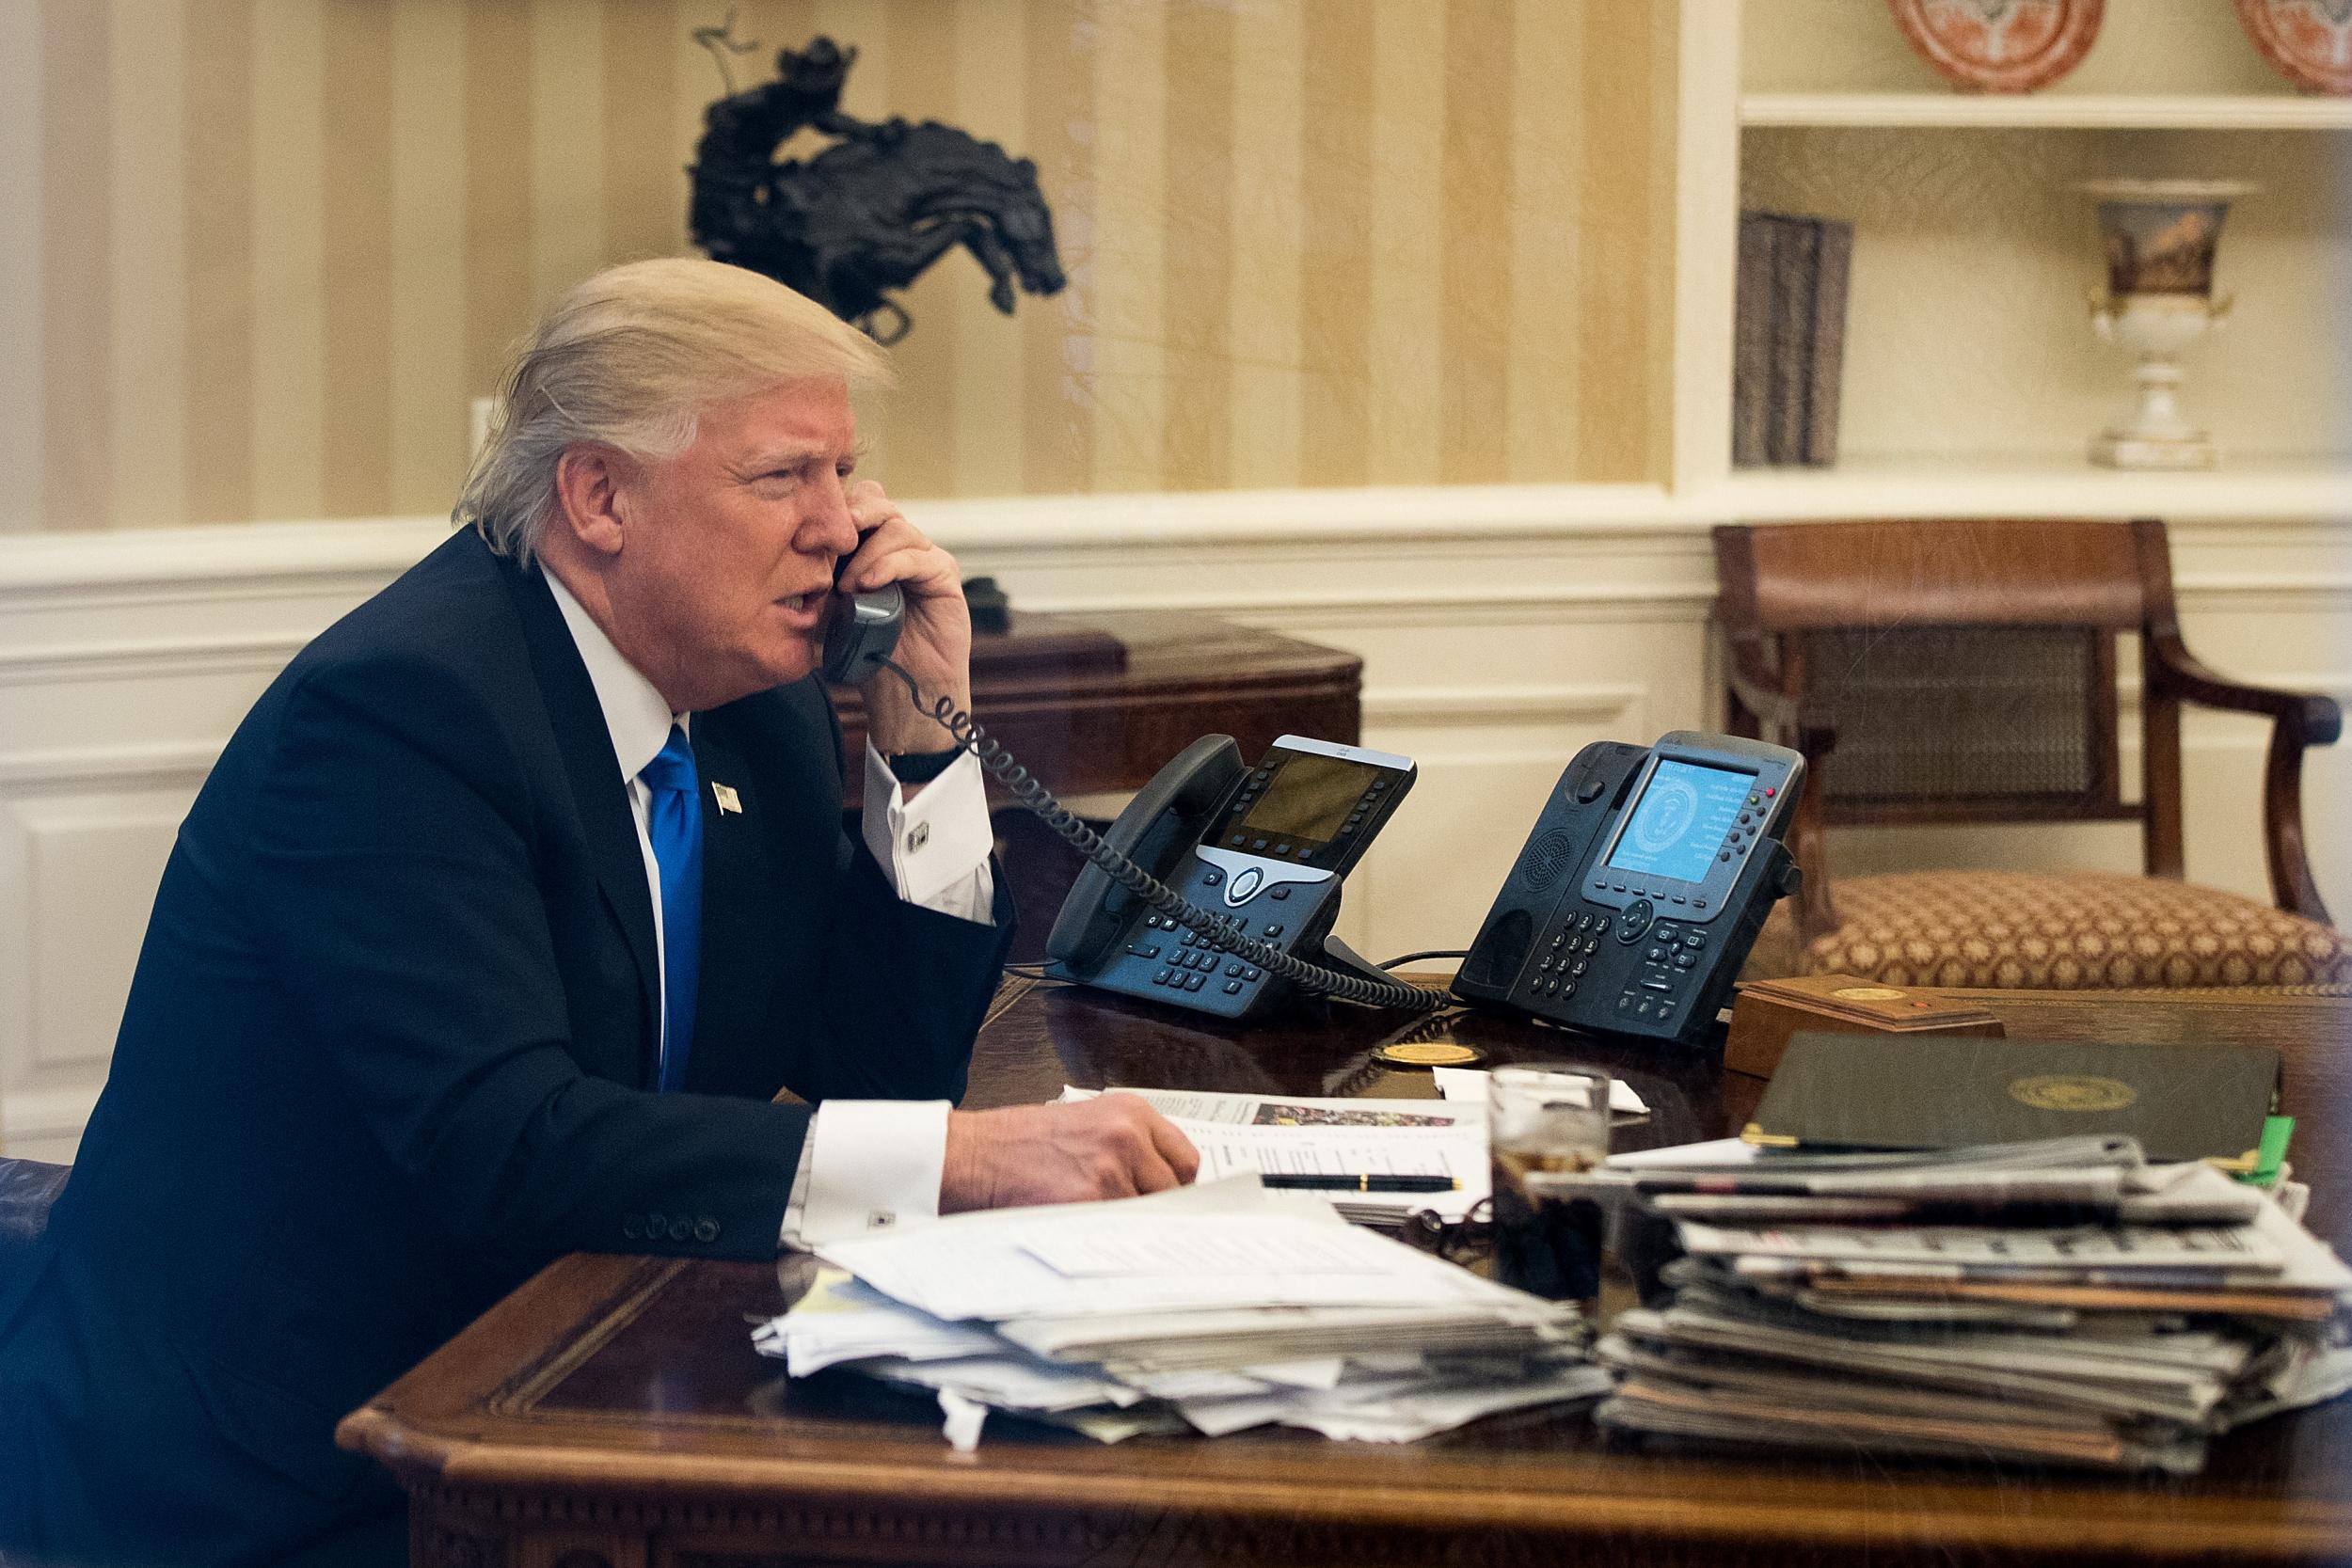 What Donald Trump S Messy Desk Says About Him According To